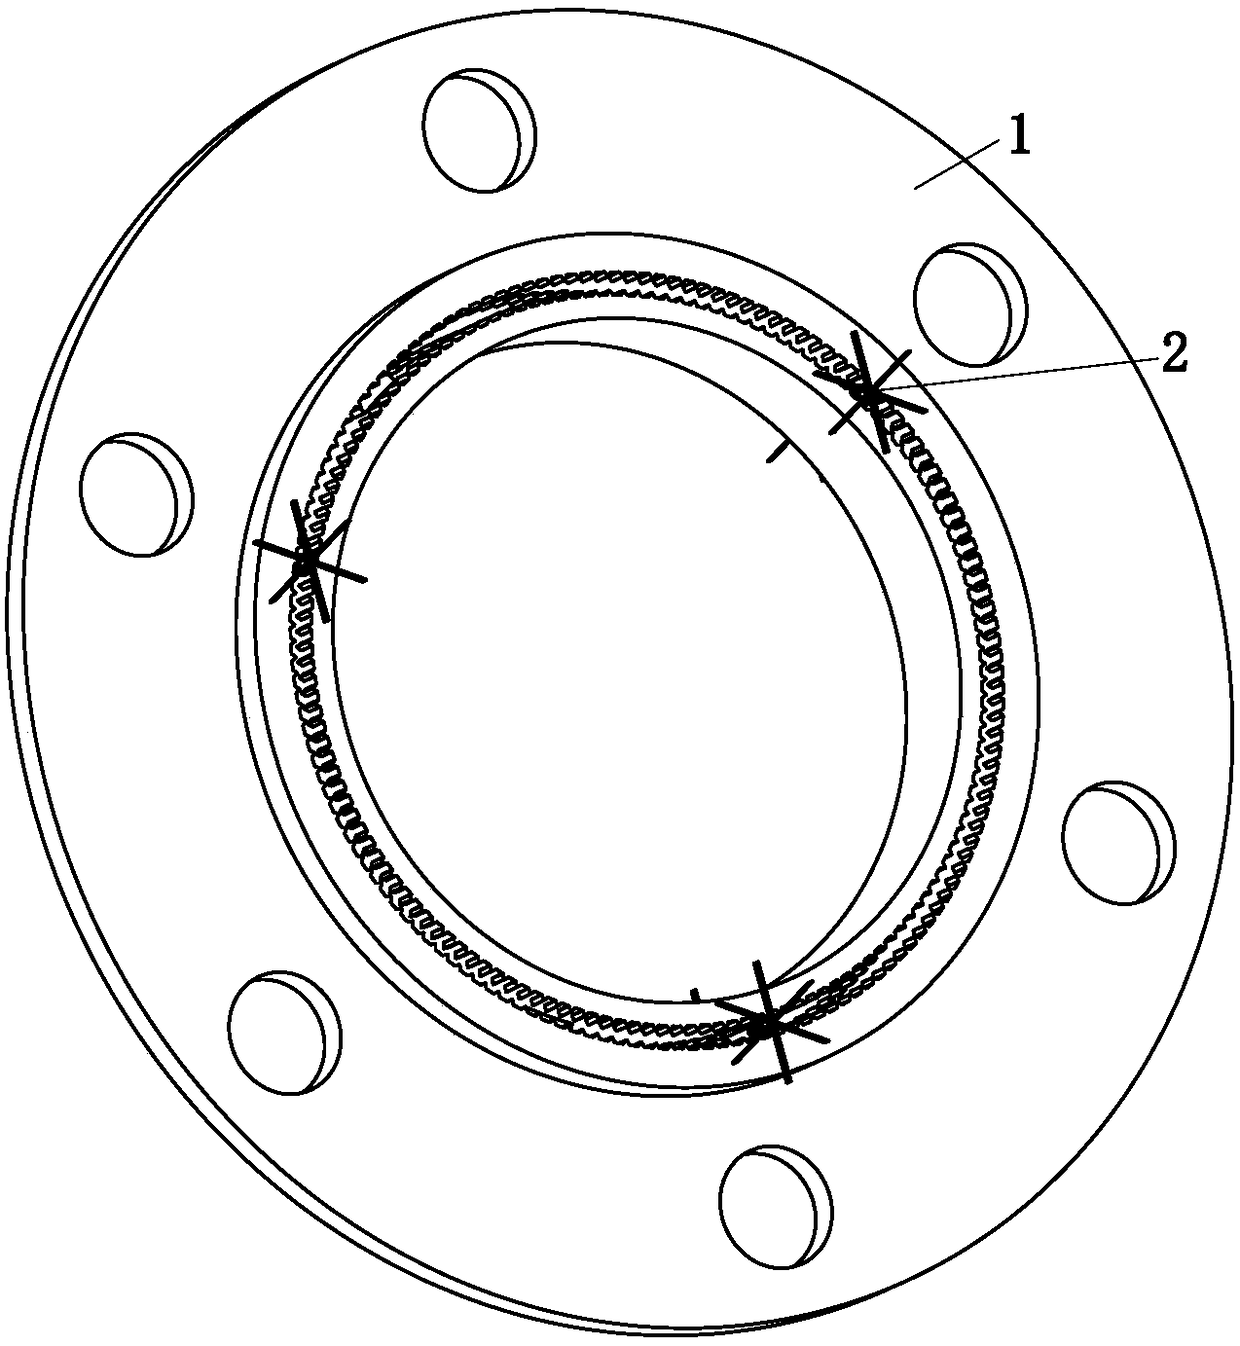 A self-cleaning oil pipeline connection flange